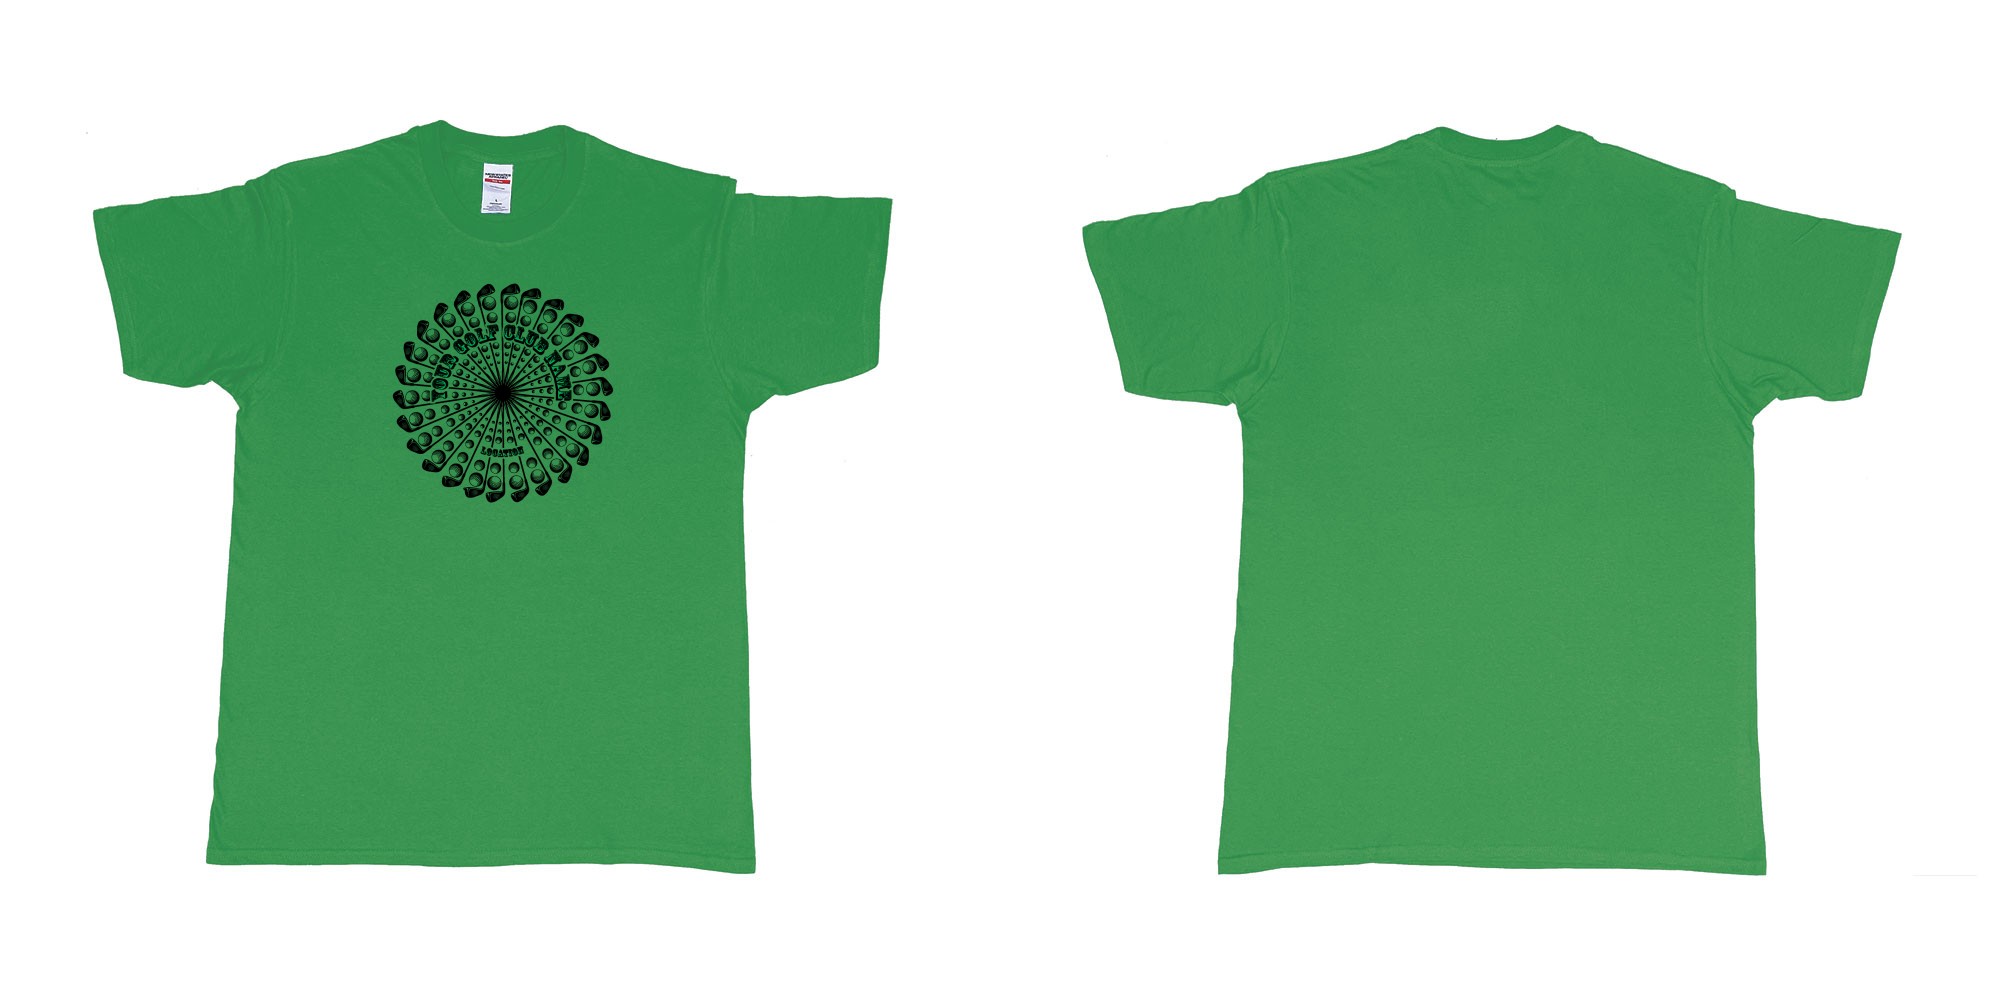 Custom tshirt design golf clubs balls mandala cutoms club name location in fabric color irish-green choice your own text made in Bali by The Pirate Way